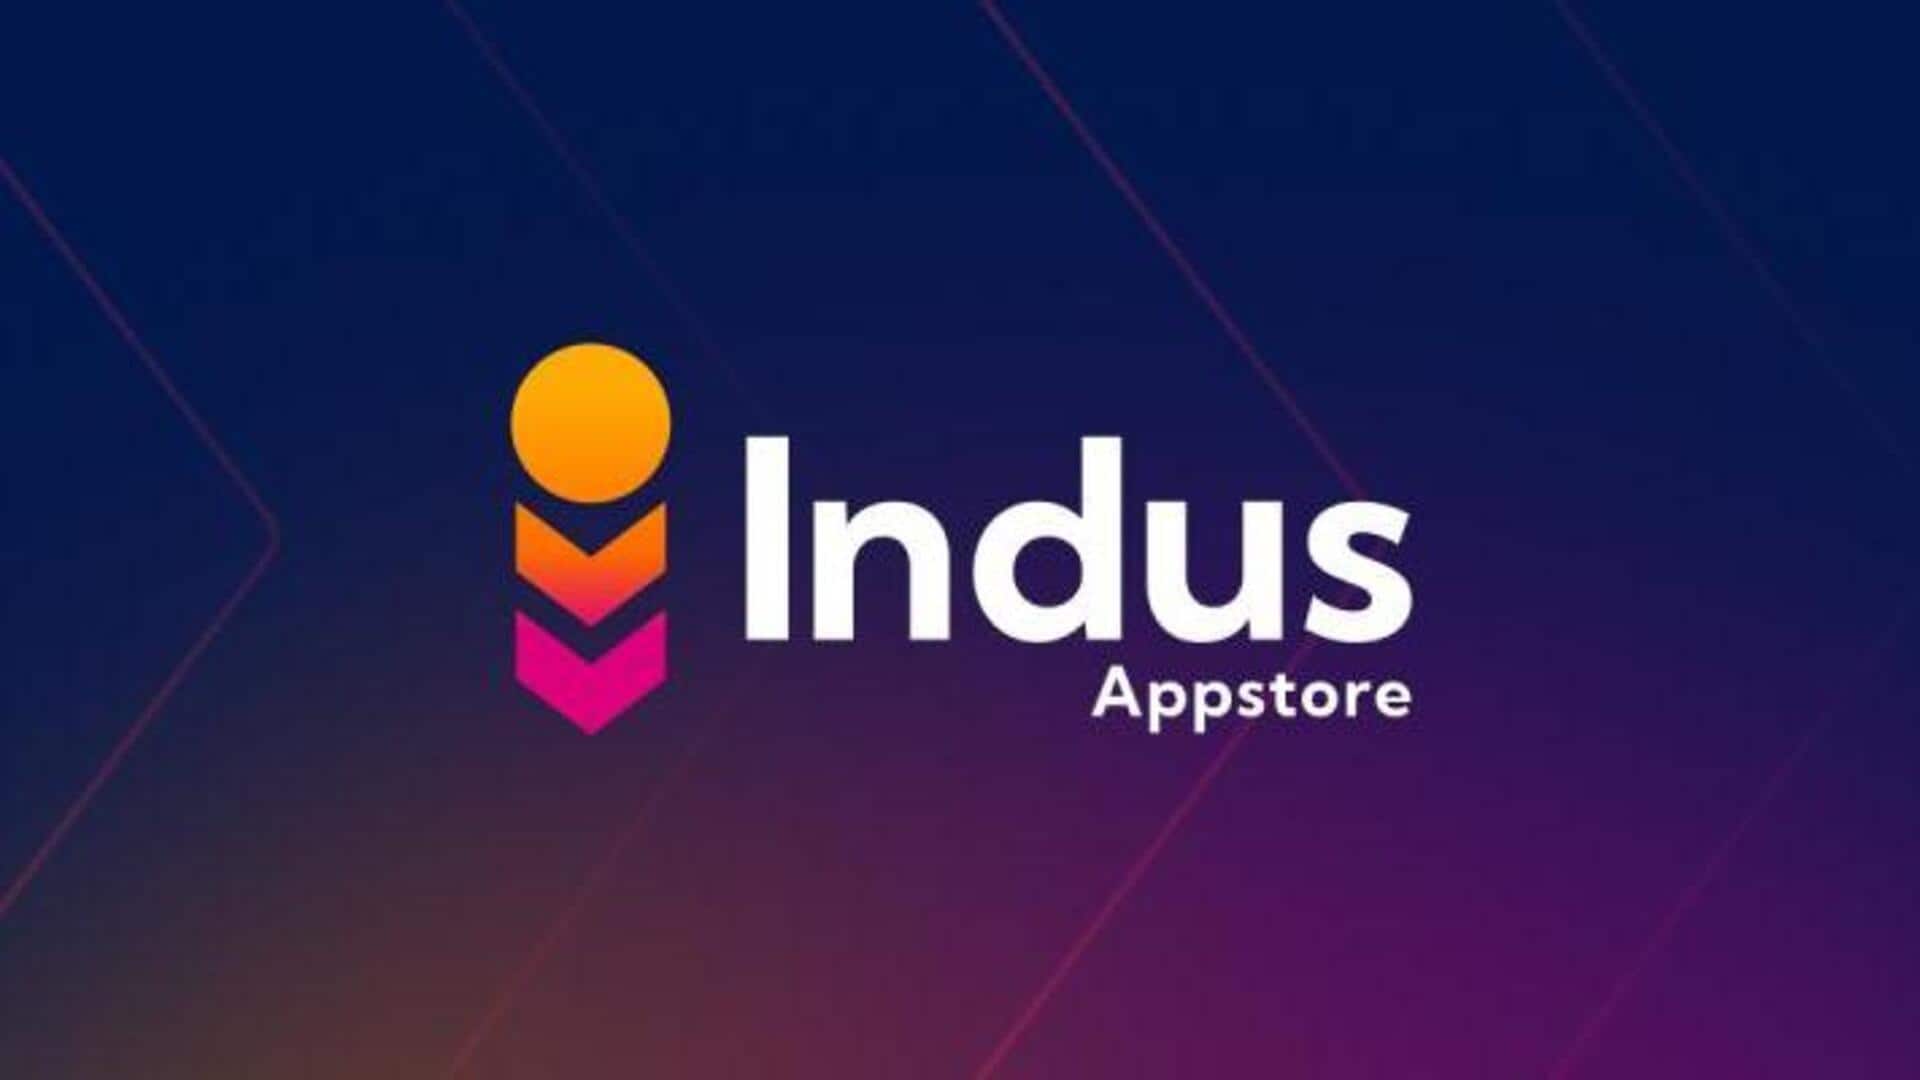 PhonePe in talks with smartphone brands for Indus Appstore integration